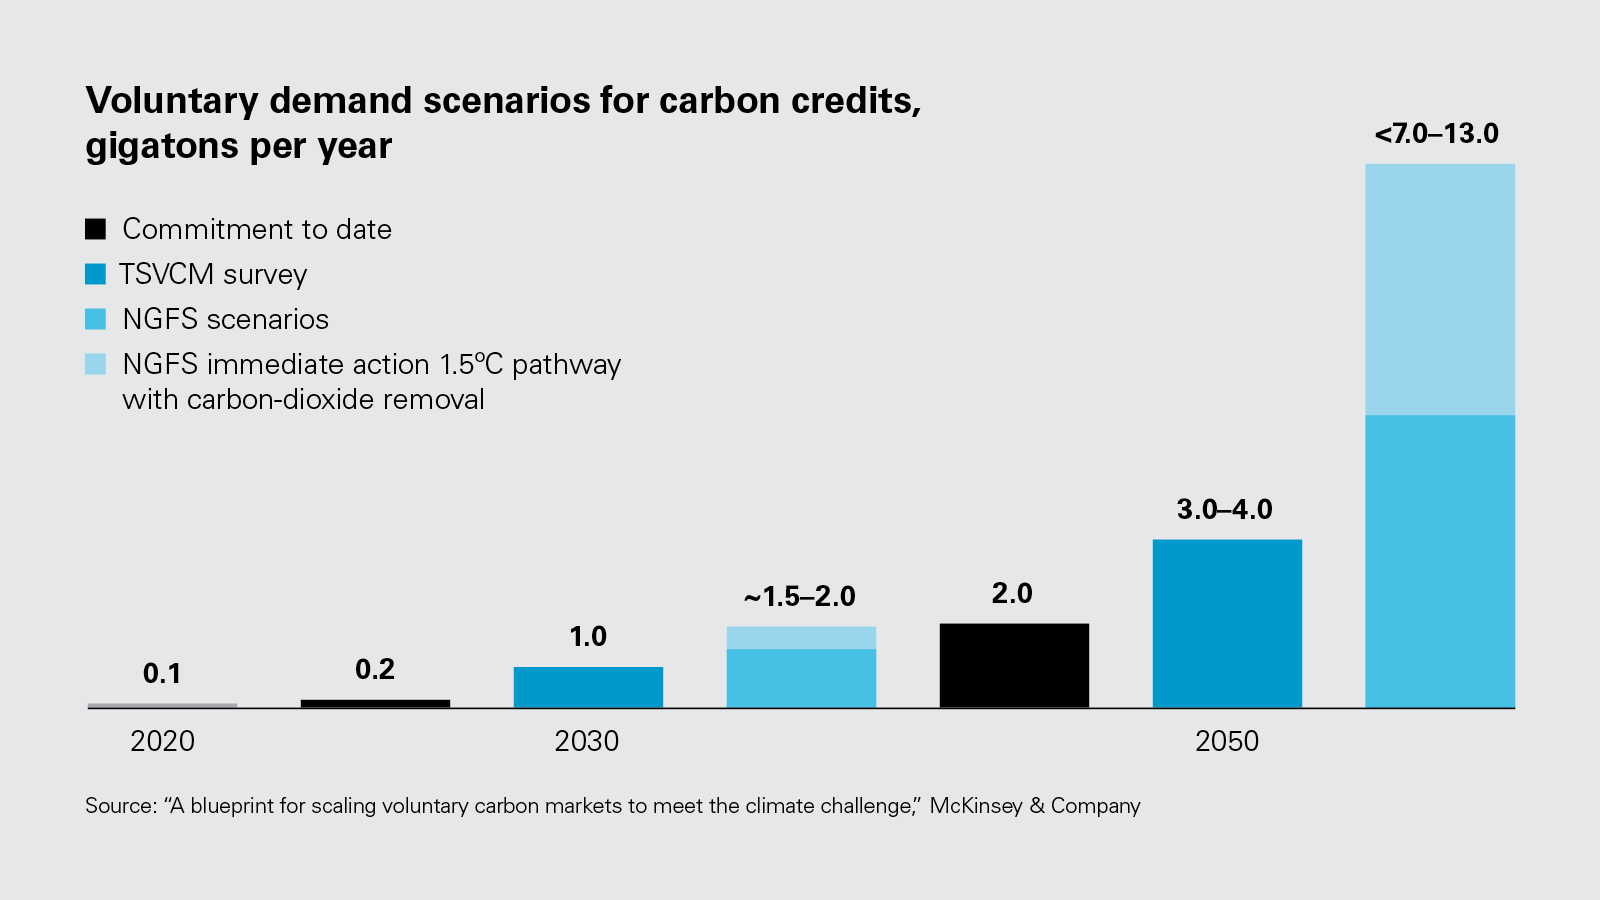 Voluntary demand scenarios for carbon credits, gigatons per year